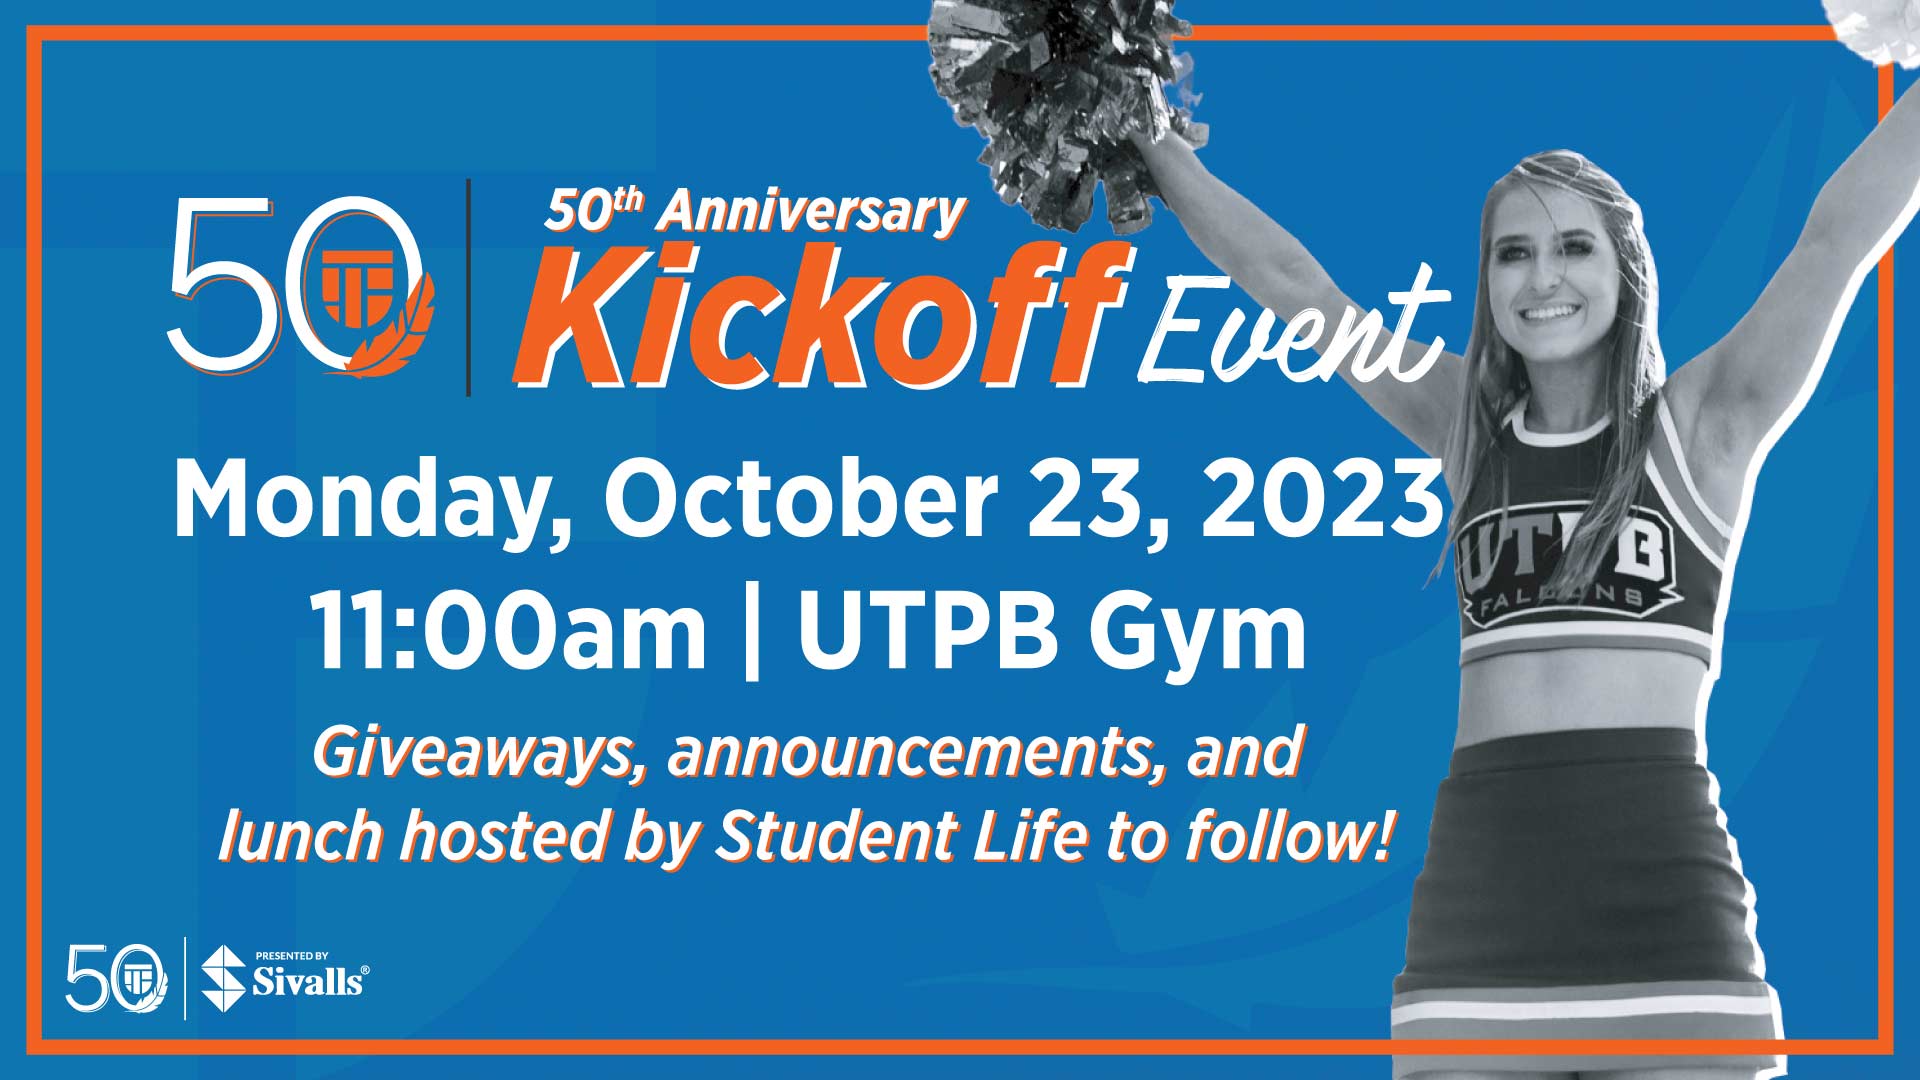 email flyer for 50th anniversary kick off